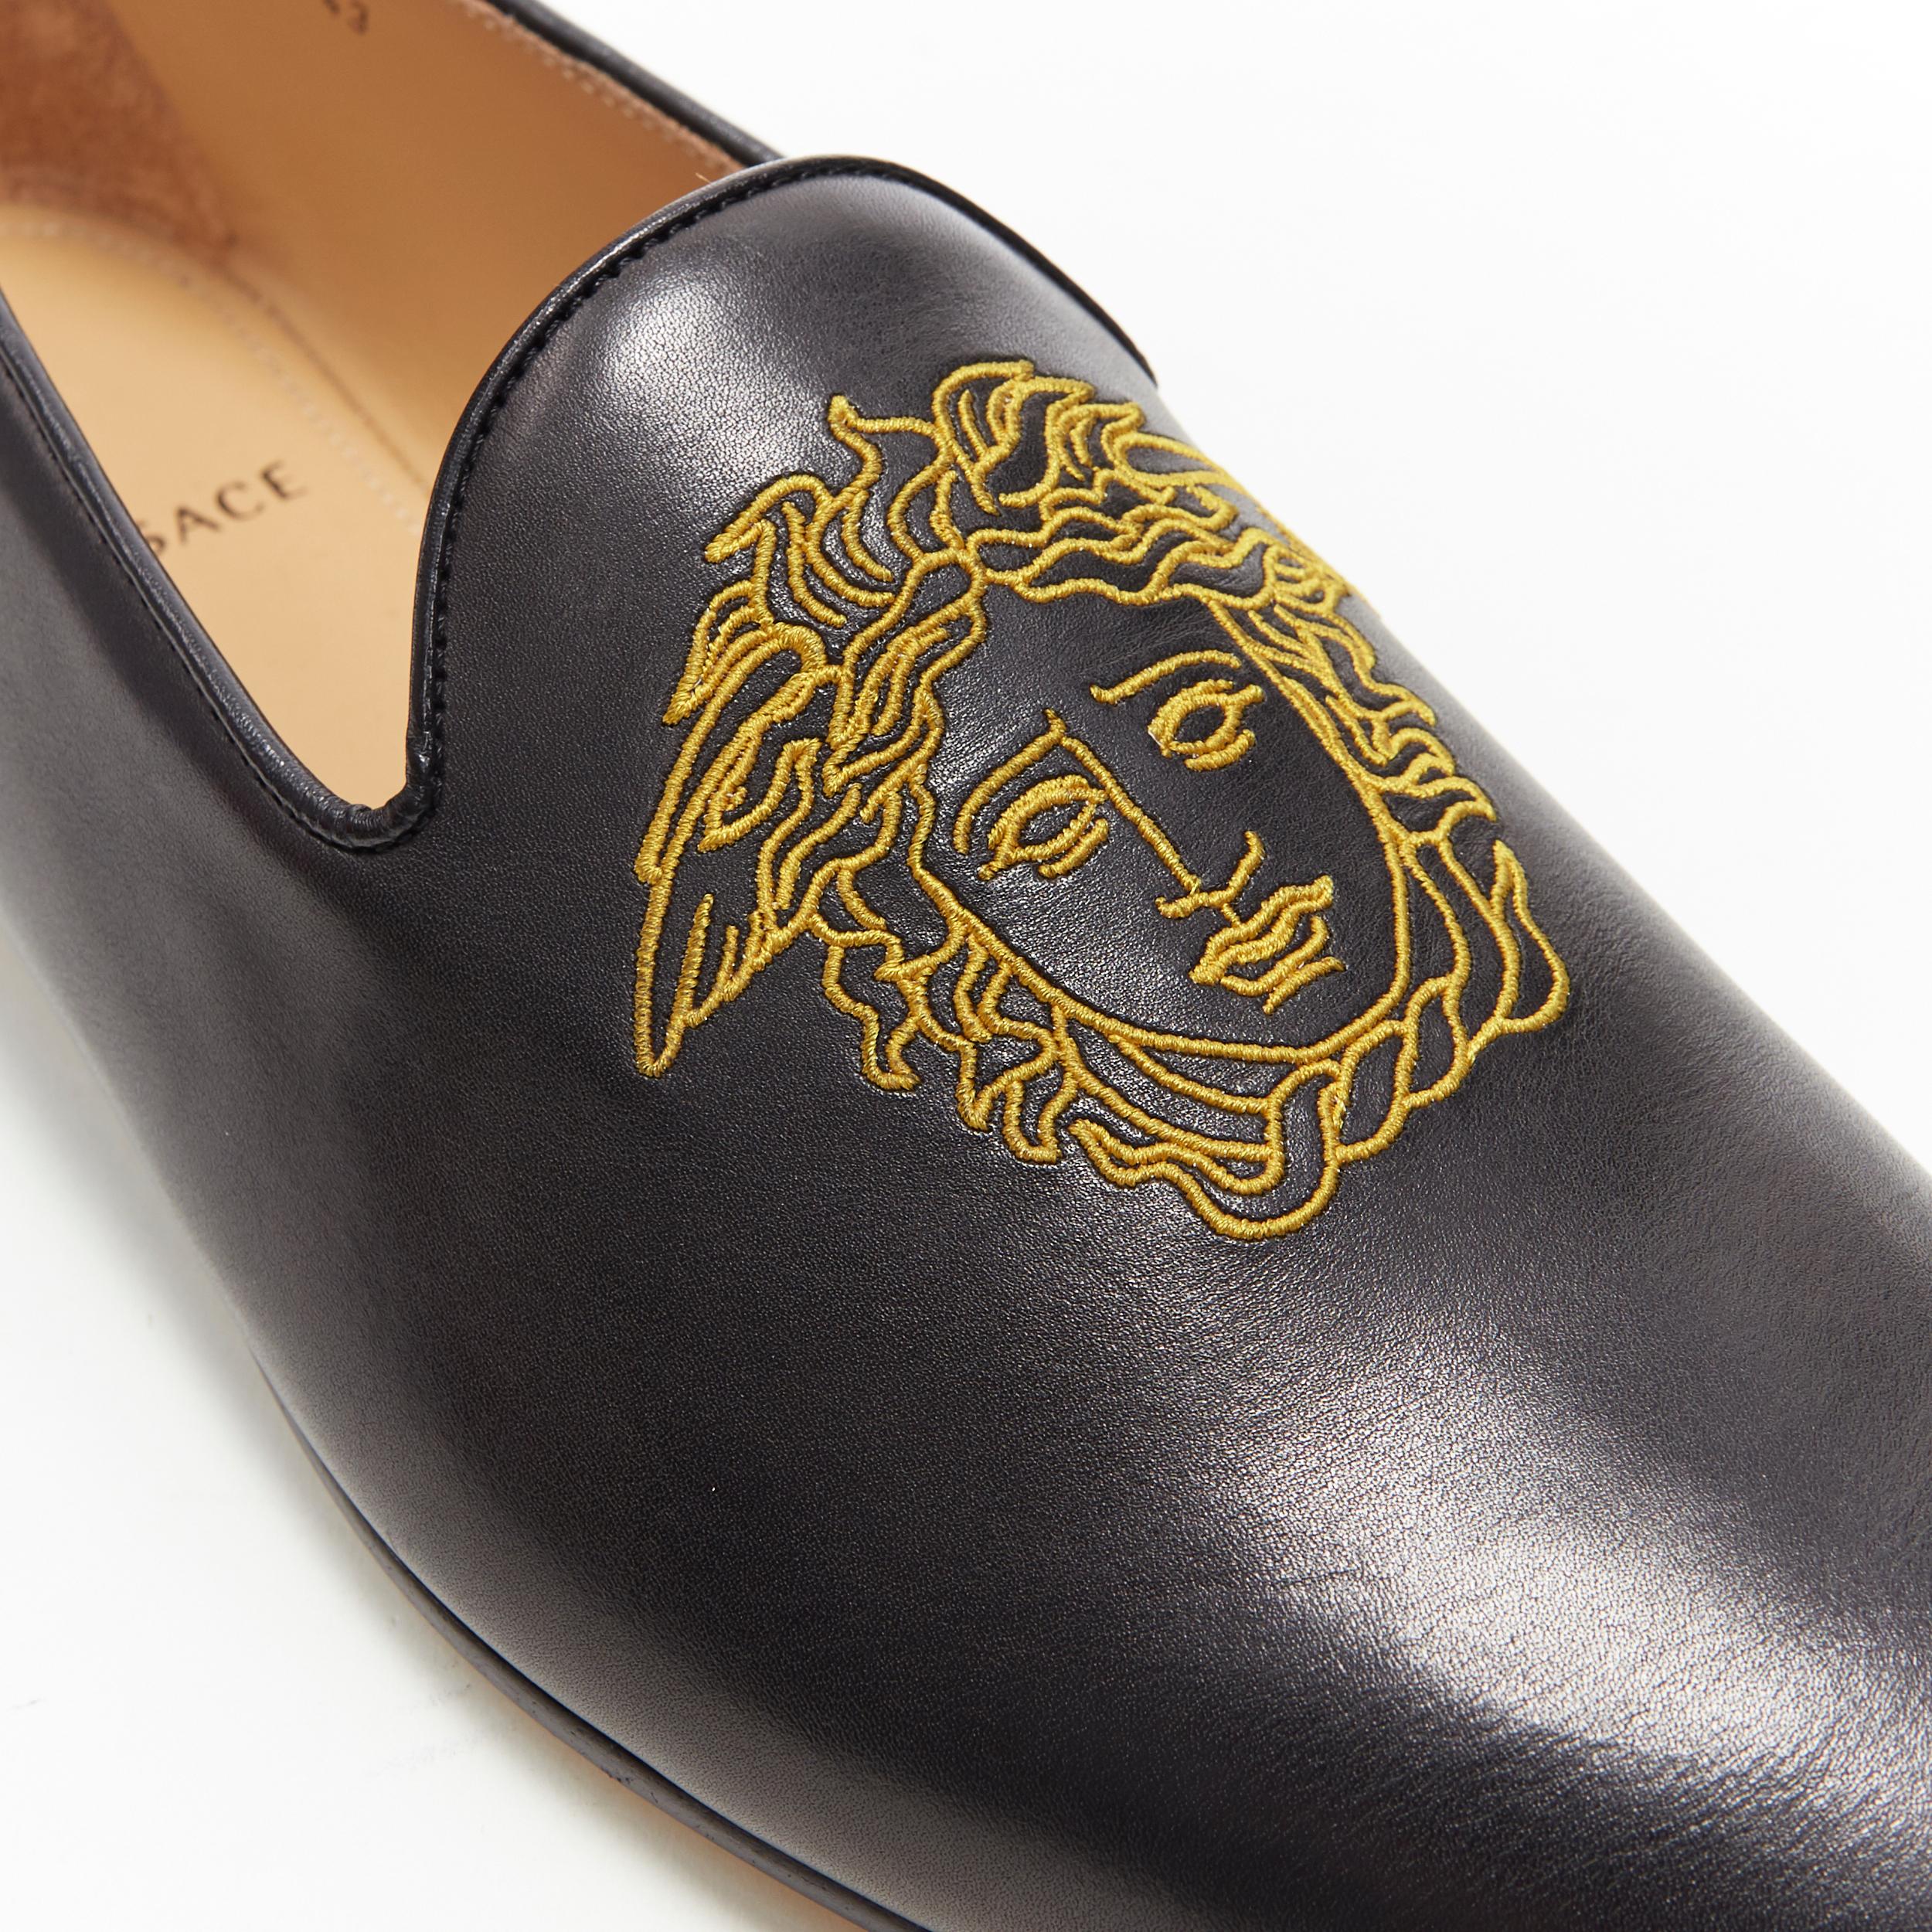 Men's new VERSACE black leather gold Medusa embroidery Le Smoking slipper loafer EU44